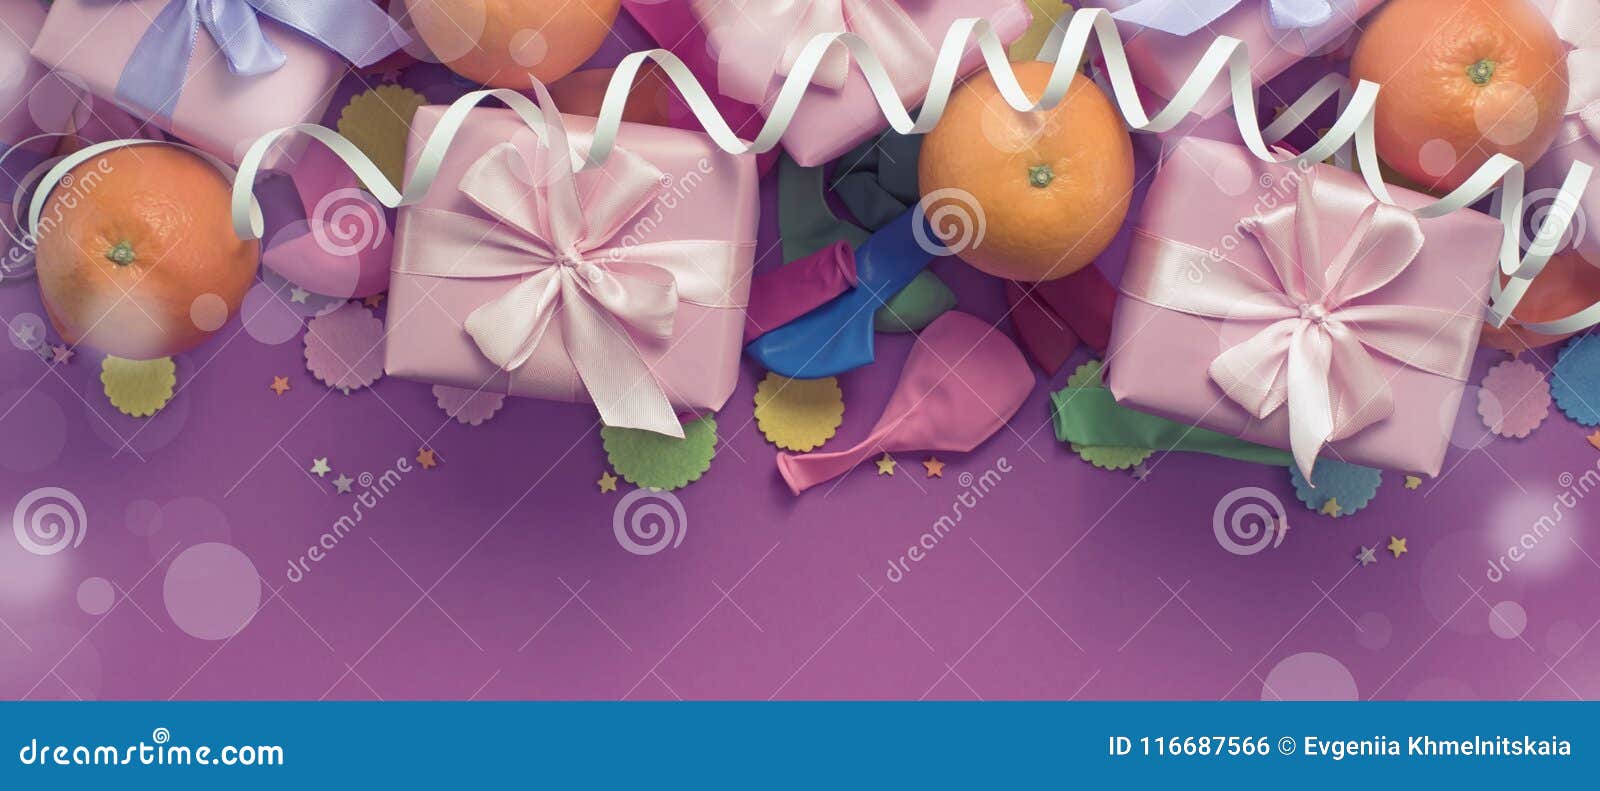 banner decorative composition three boxes with gifts satin ribbon bow oranges confetti serpentine birthday party.